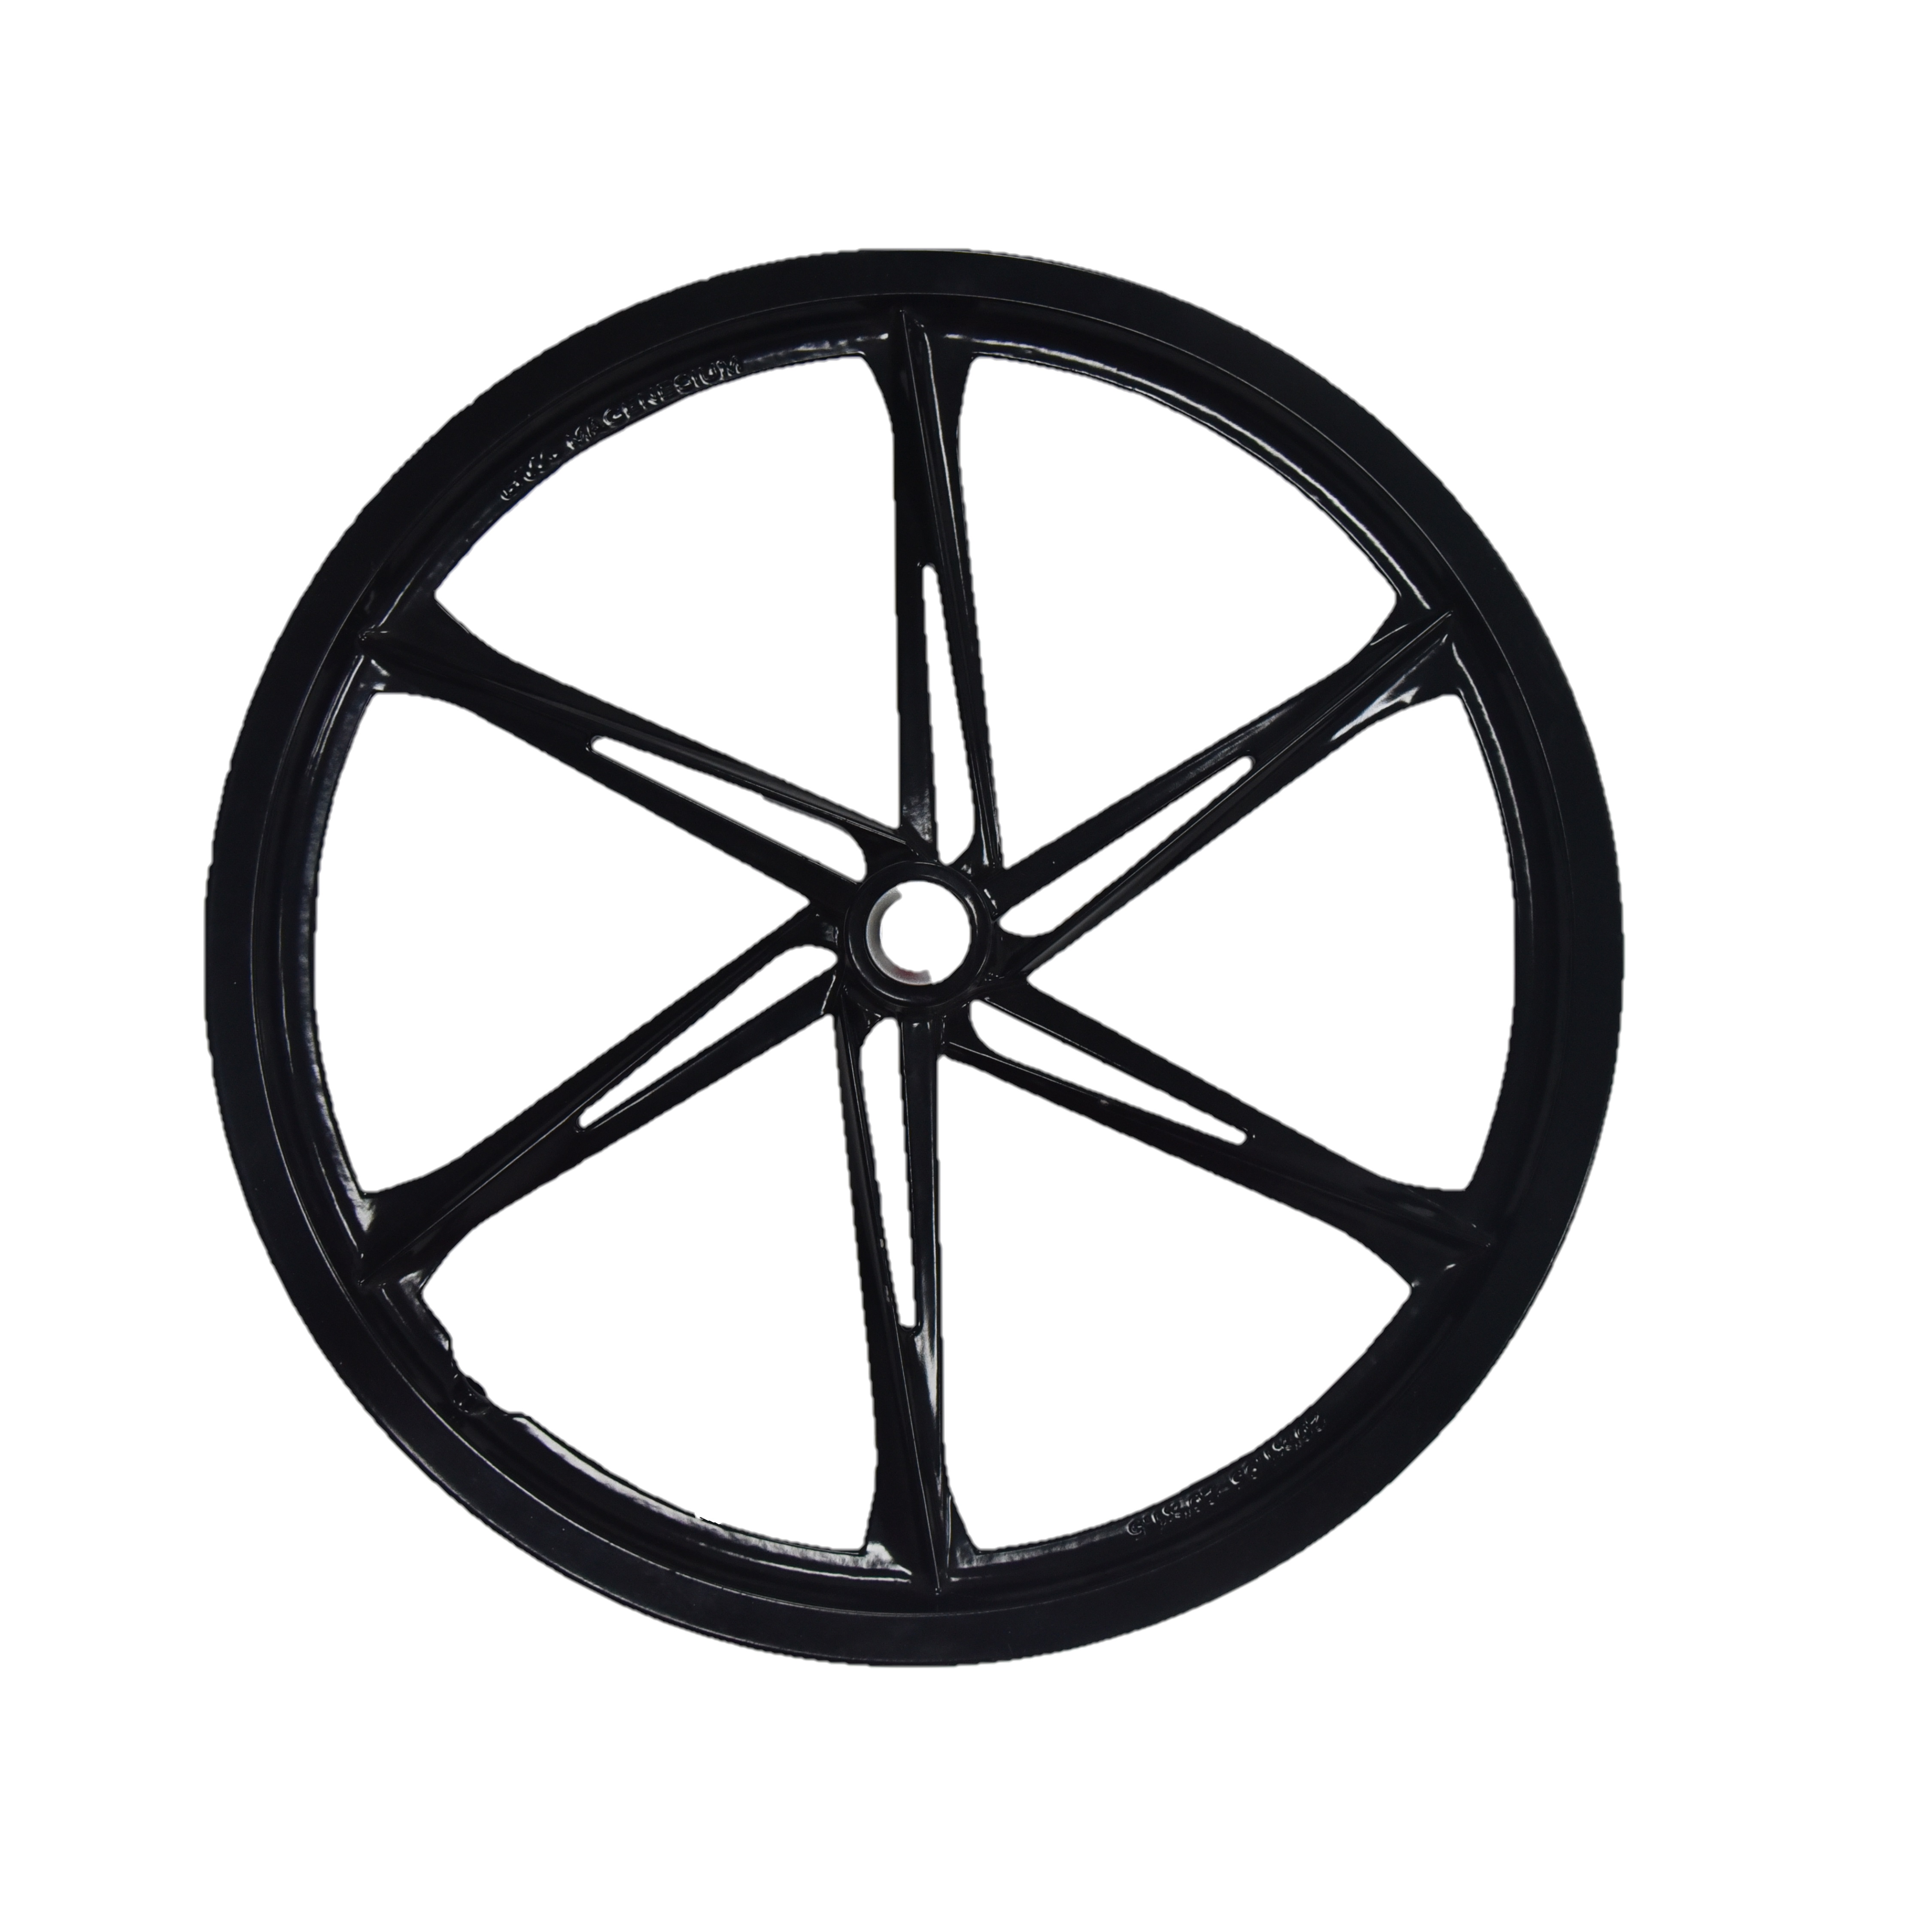 Advantages of magnesium alloy wheels and the benefits you can get